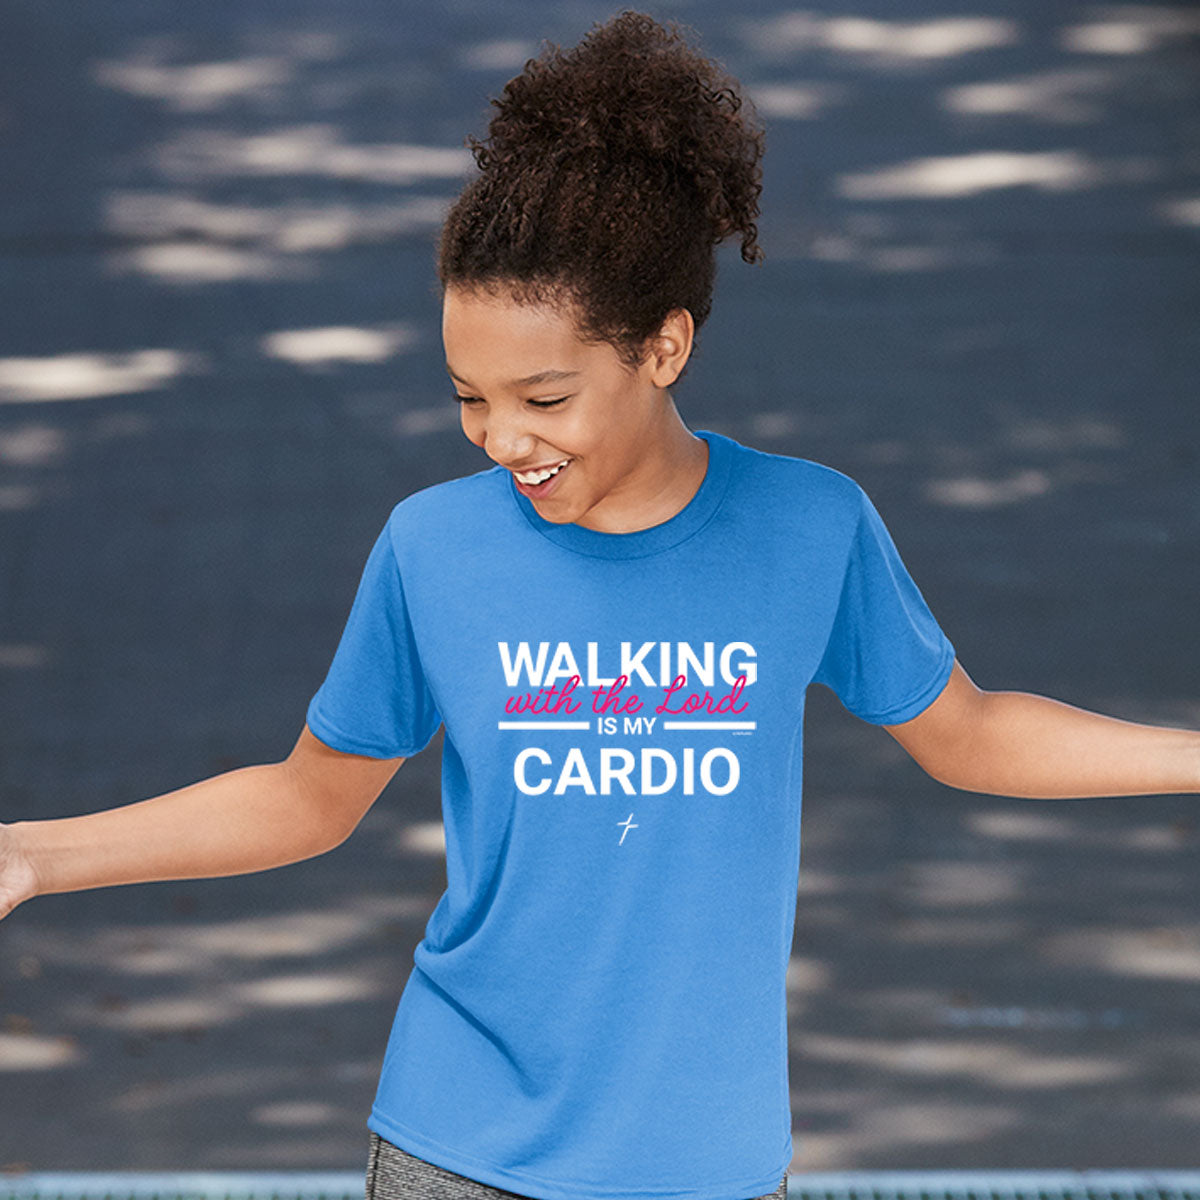 Kerusso ACTIVE Youth T-Shirt Cardio